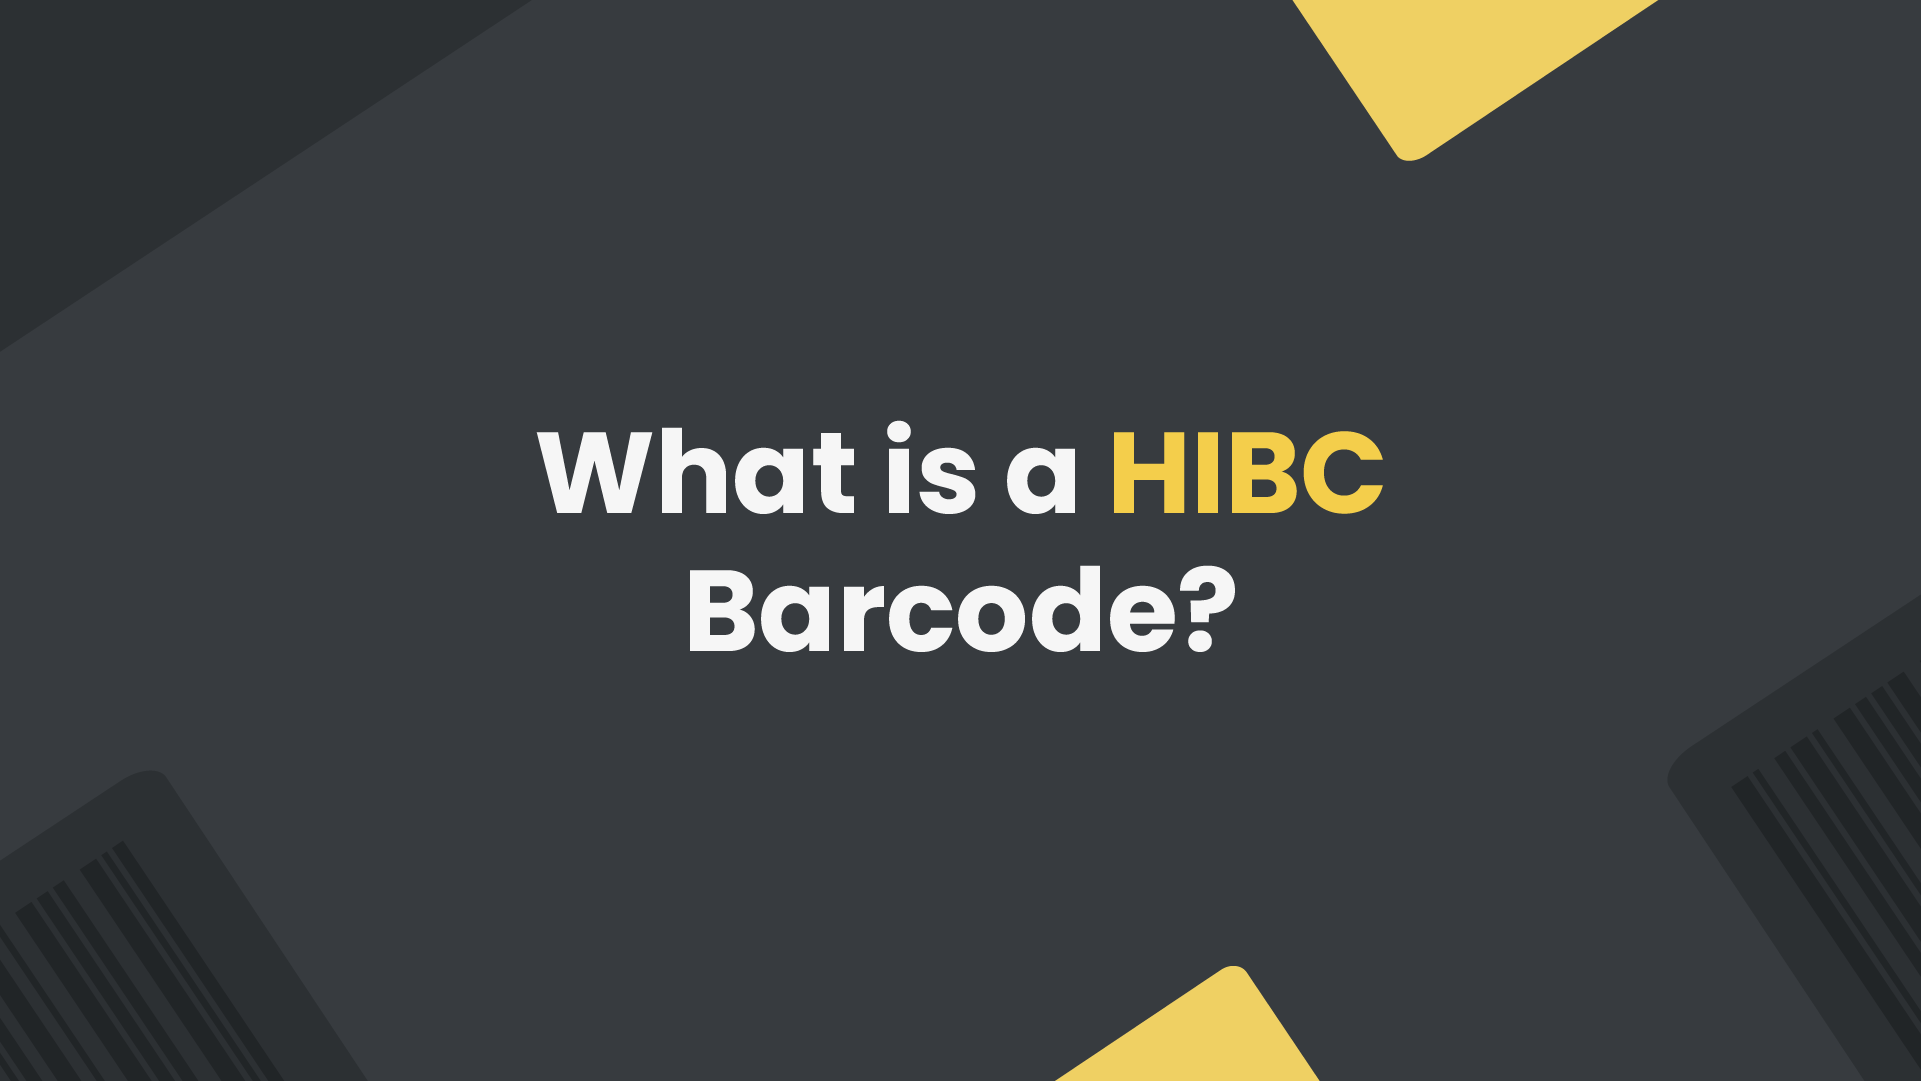 What is a HIBC barcode?